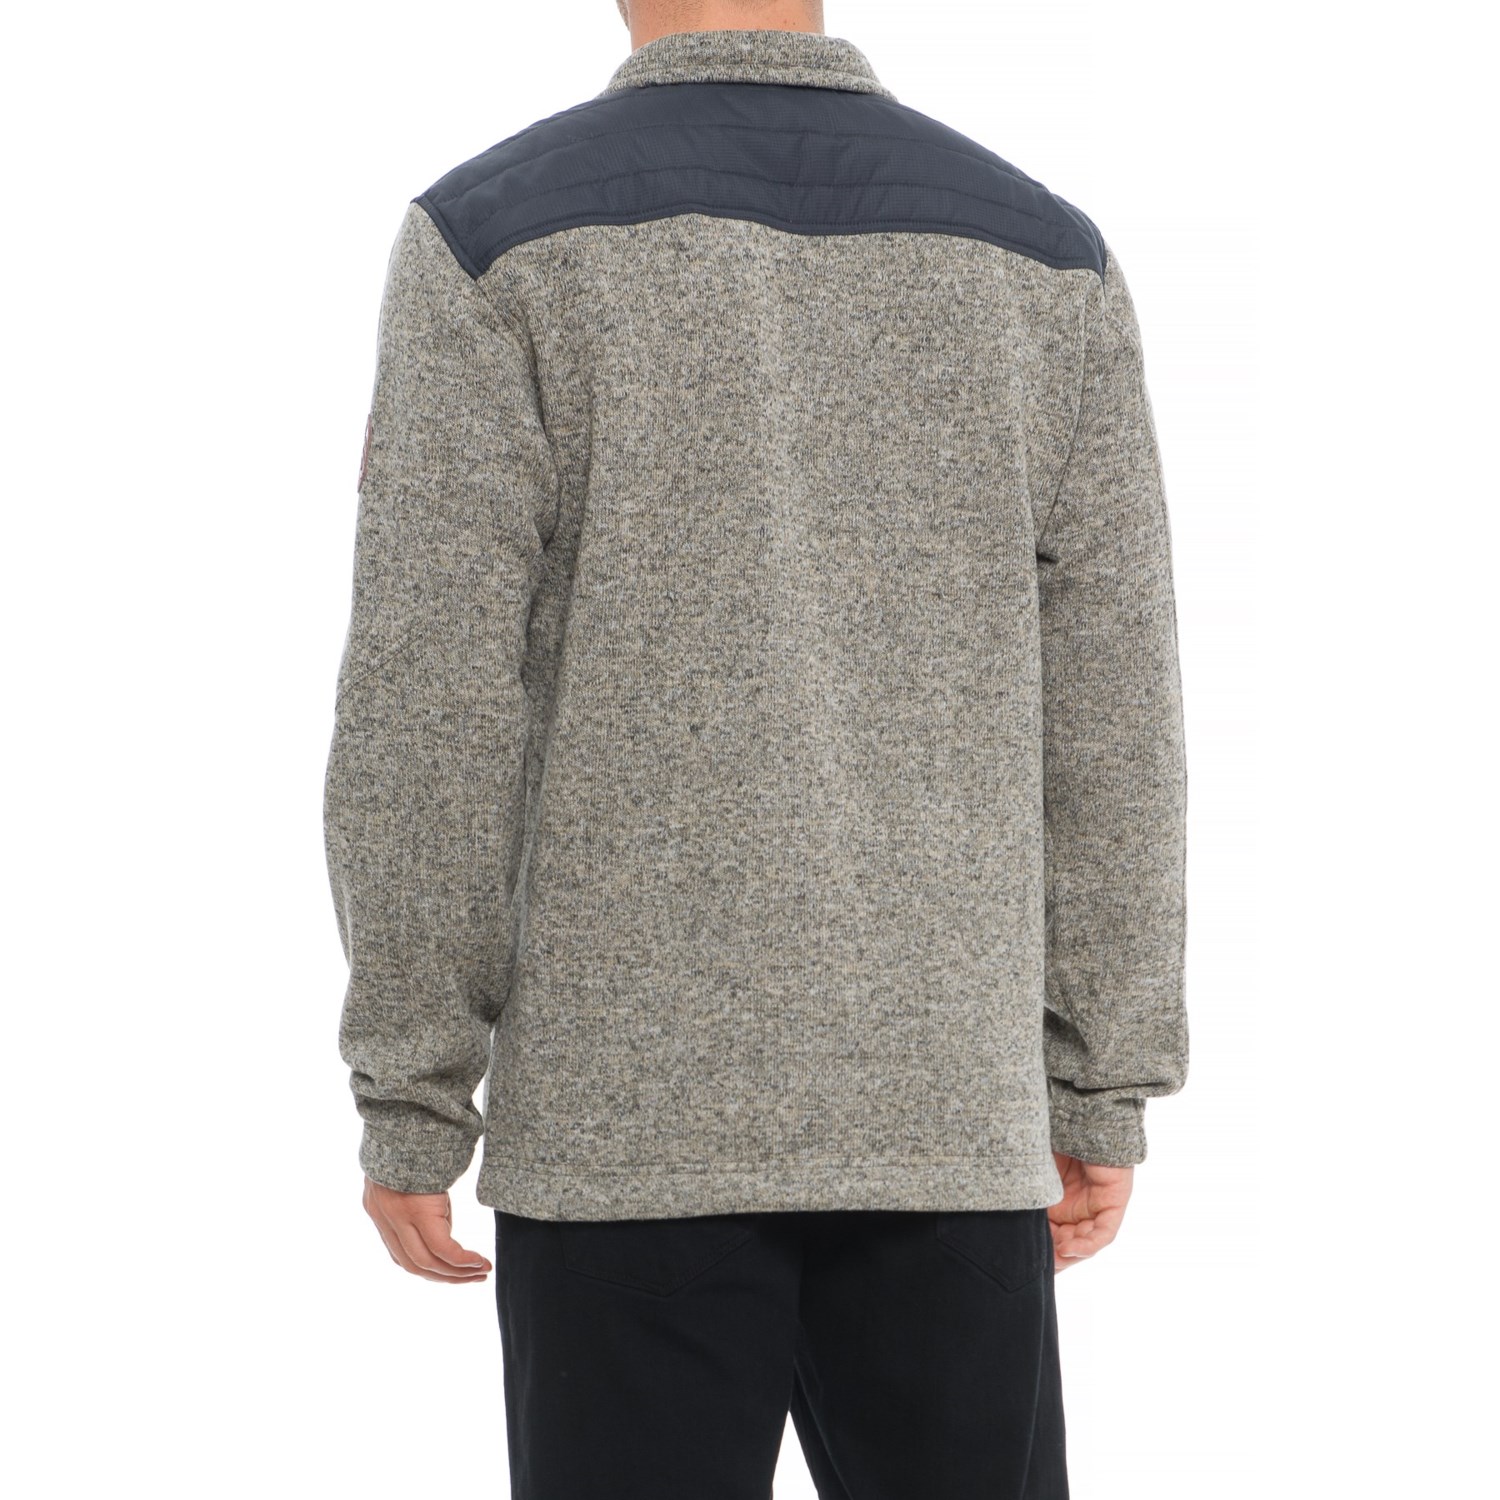 Free Country Sweater Fleece Jacket (For Men) - Save 64%